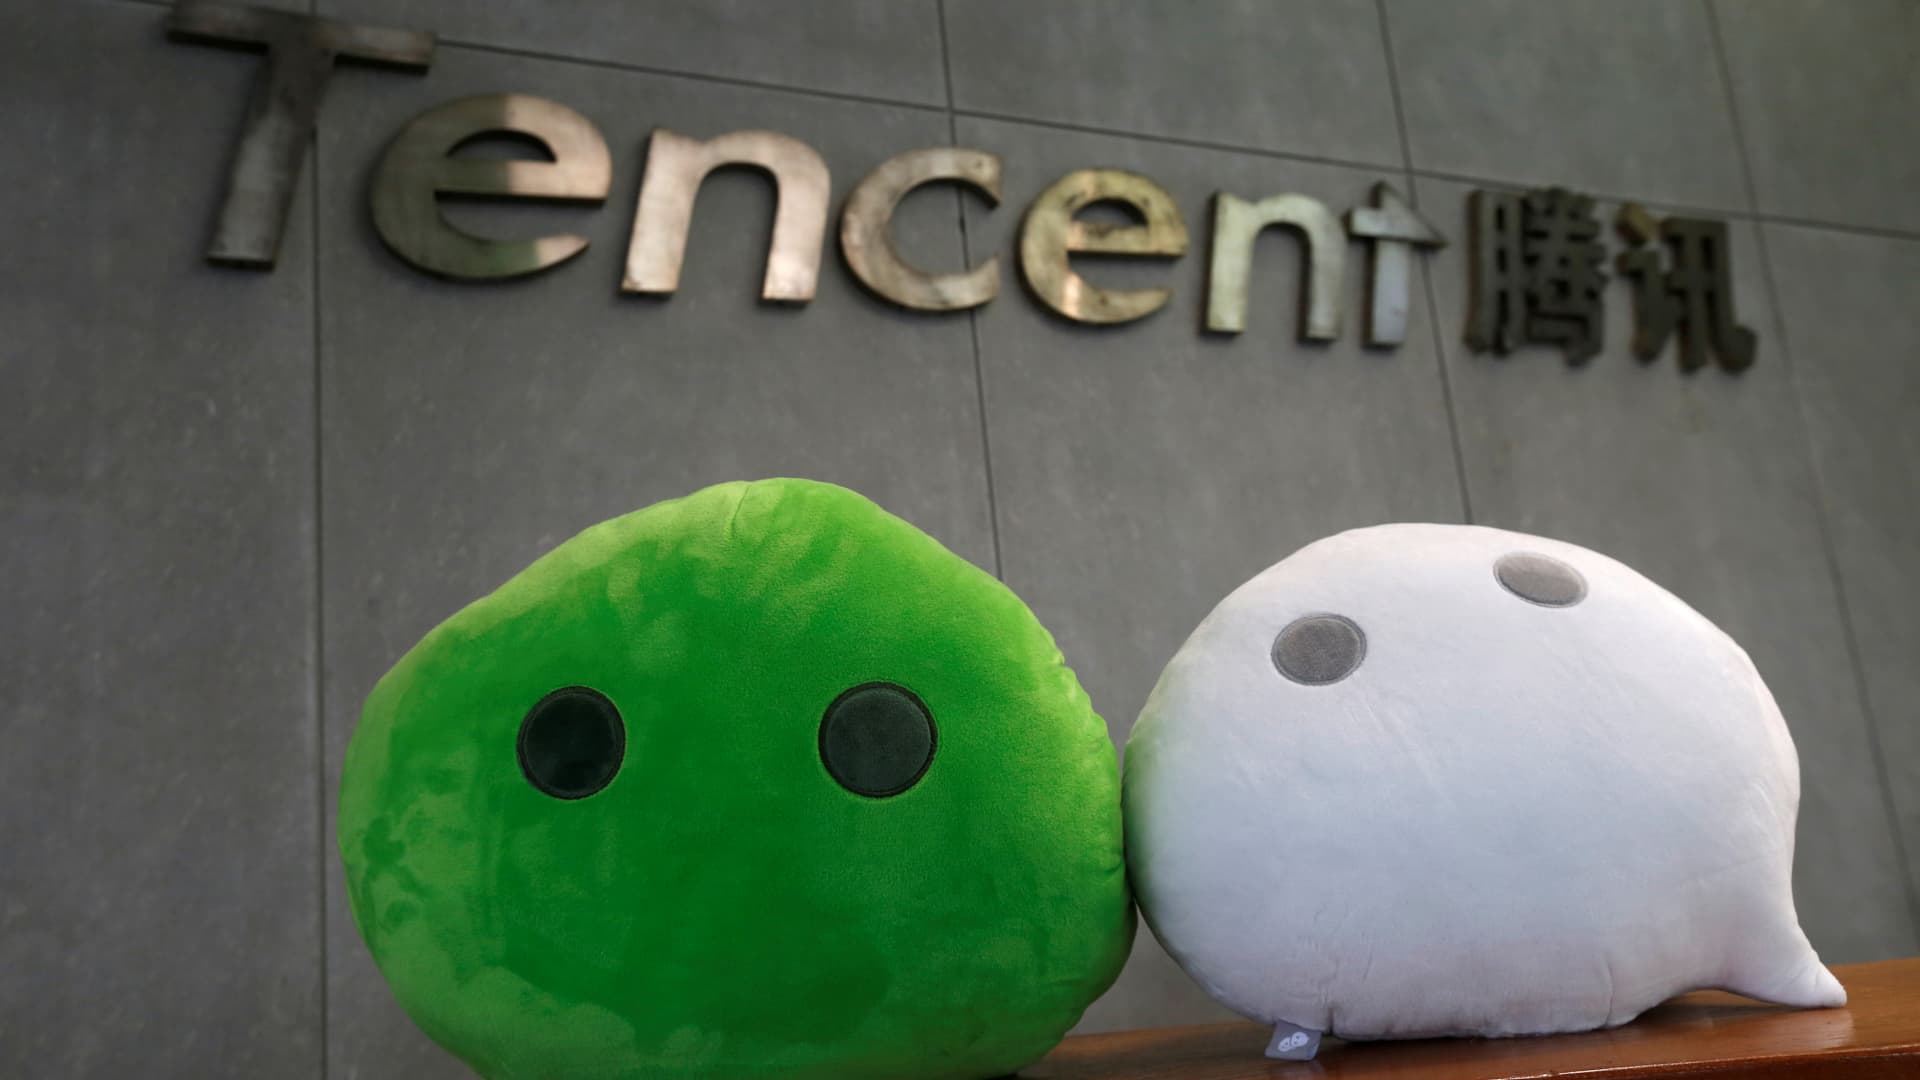 Tencent the $370 billion Chinese tech giant posts first ever revenue decline – CNBC